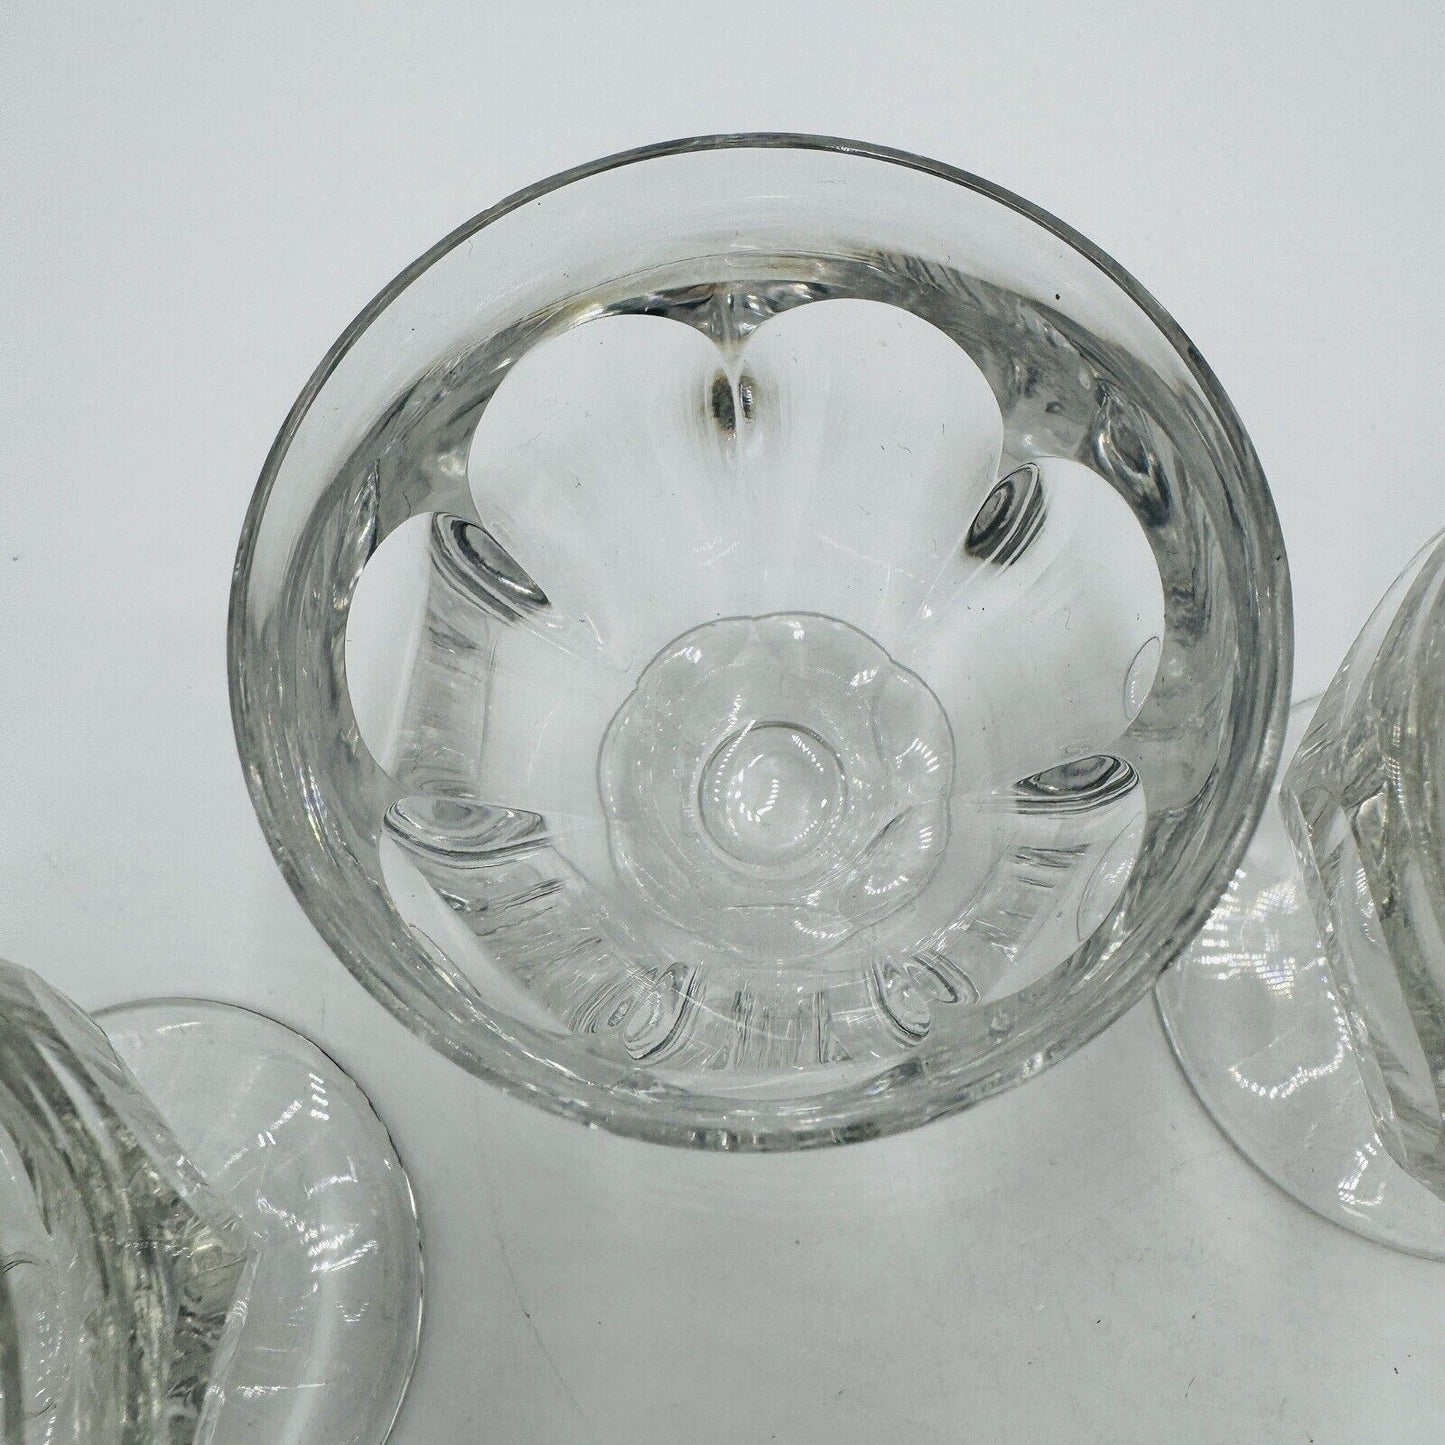 BACCARAT France Crystal Tallyrand White Wine 3 3/8” Set 4 Pieces Cordial Glasses